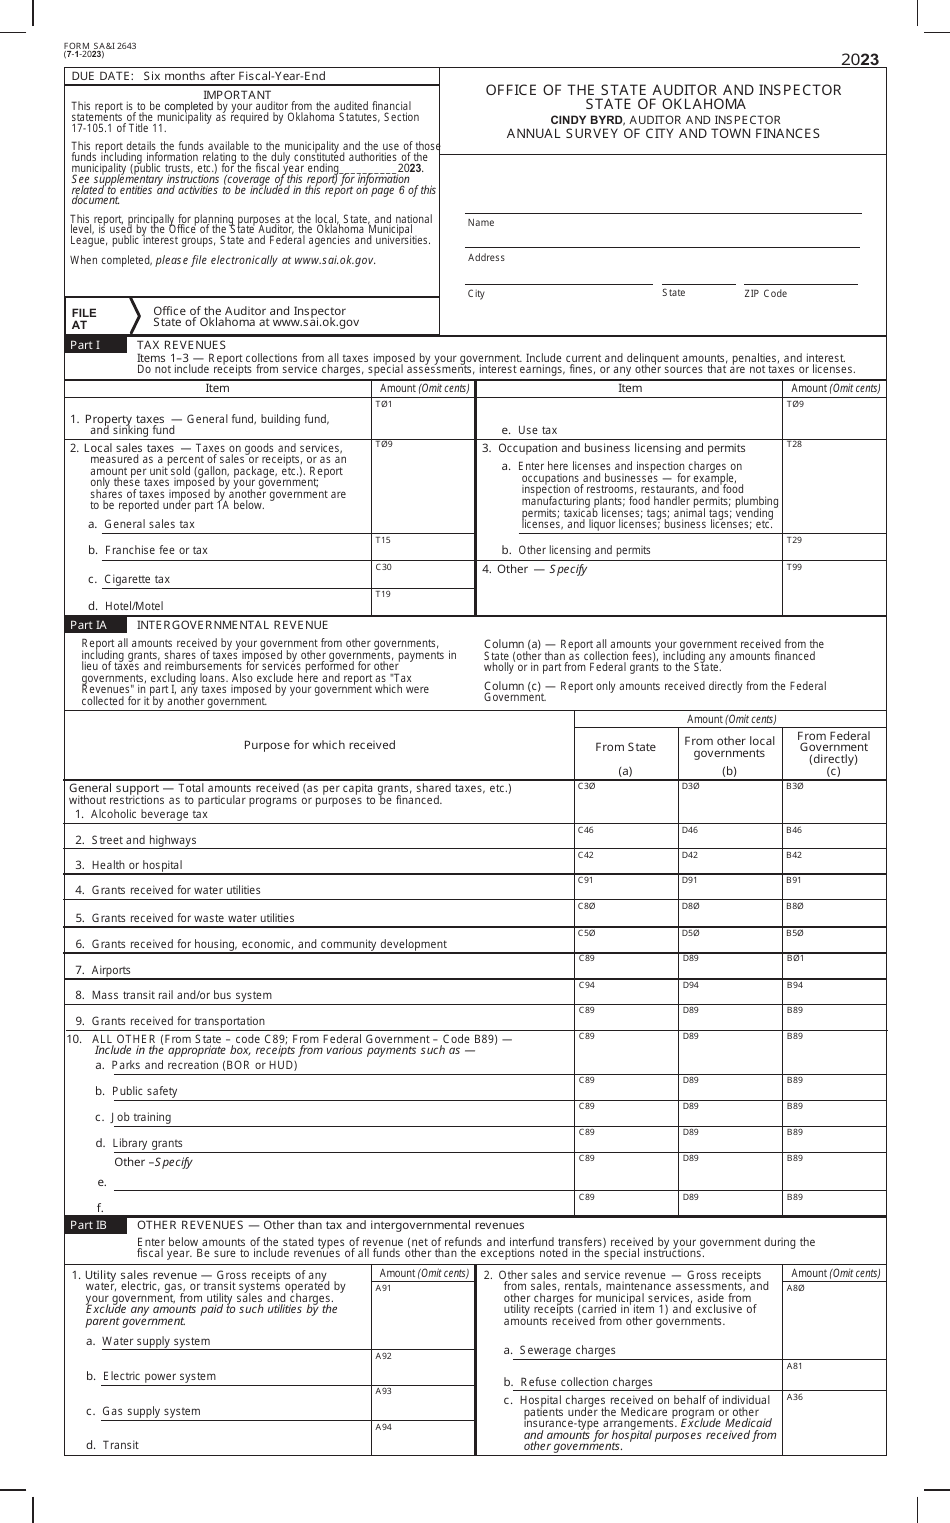 Form SAI2643 Annual Survey of City and Town Finances - Oklahoma, Page 1